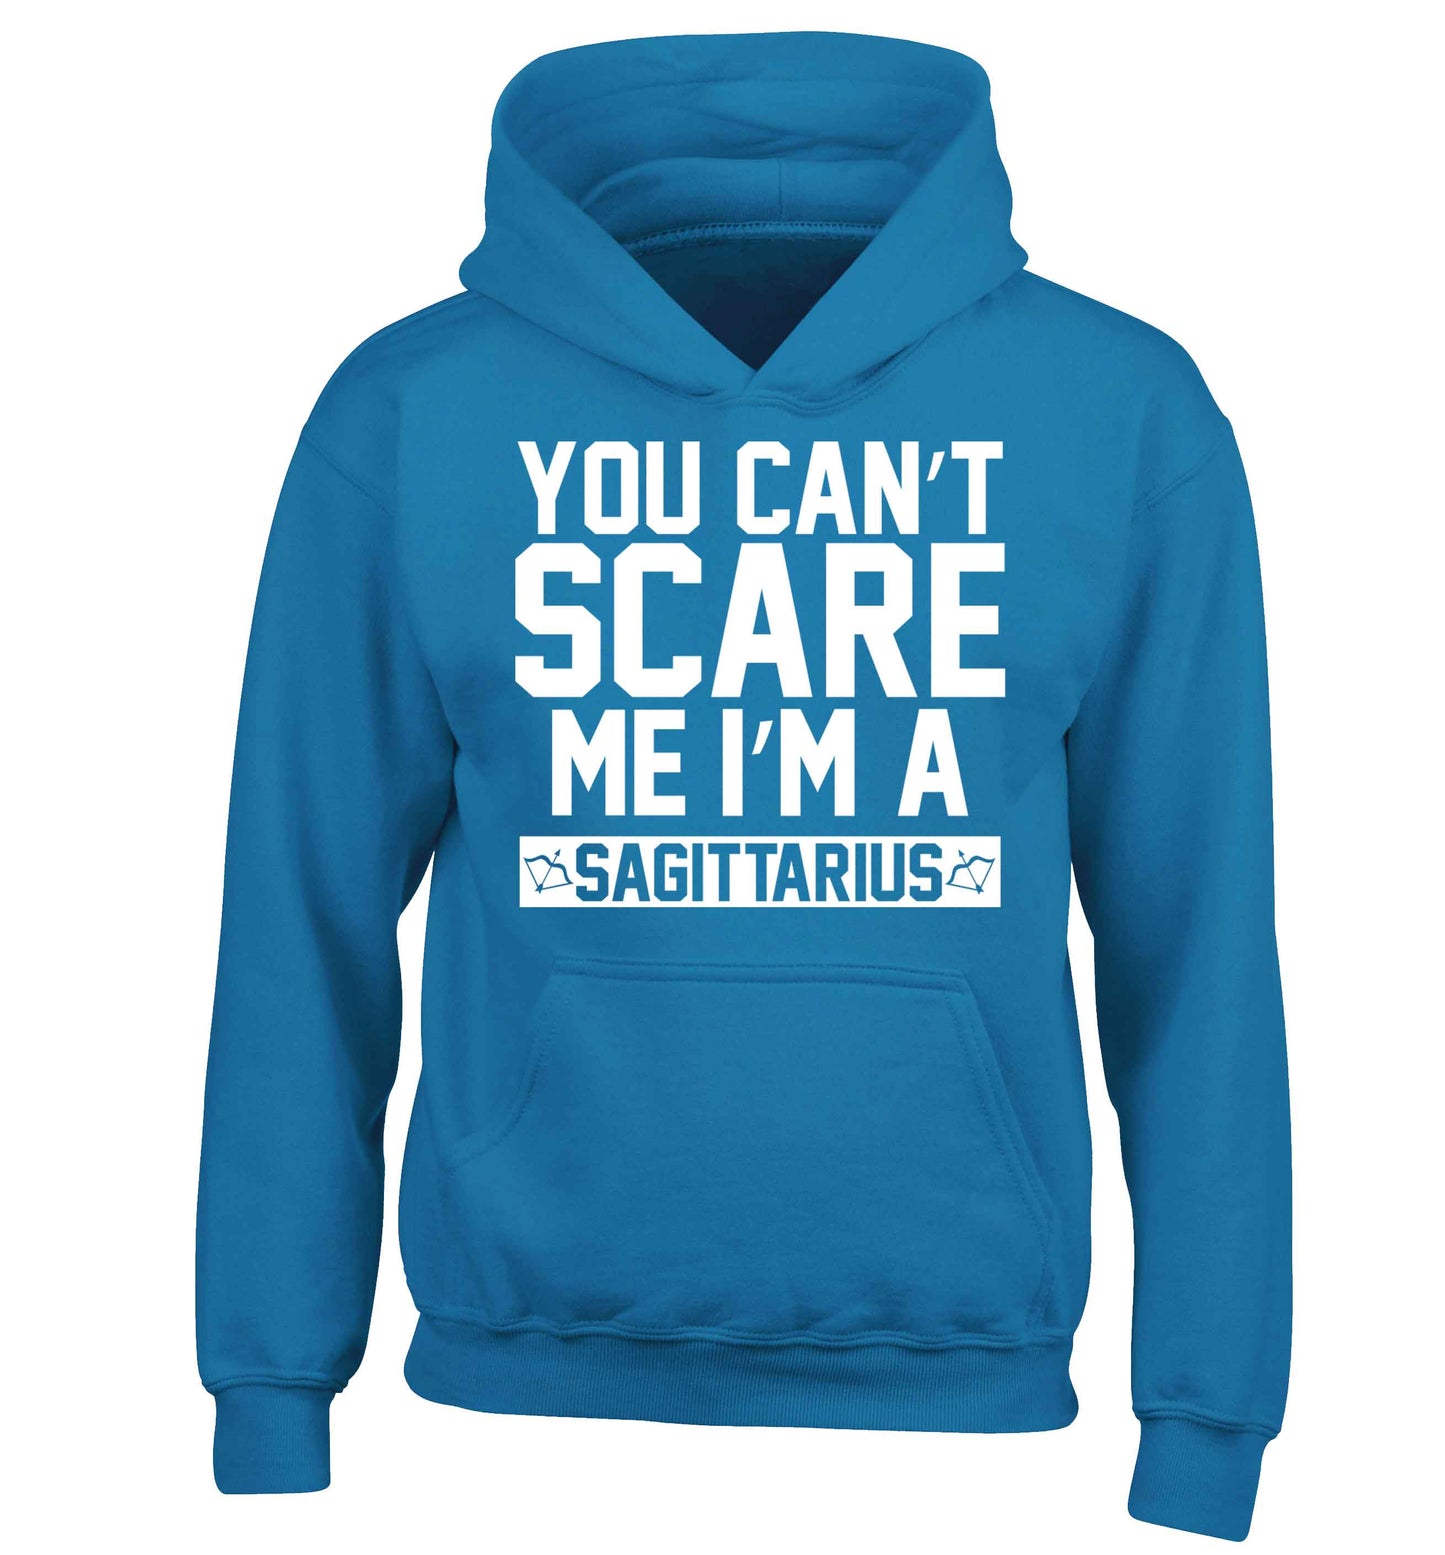 You can't scare me I'm a sagittarius children's blue hoodie 12-13 Years